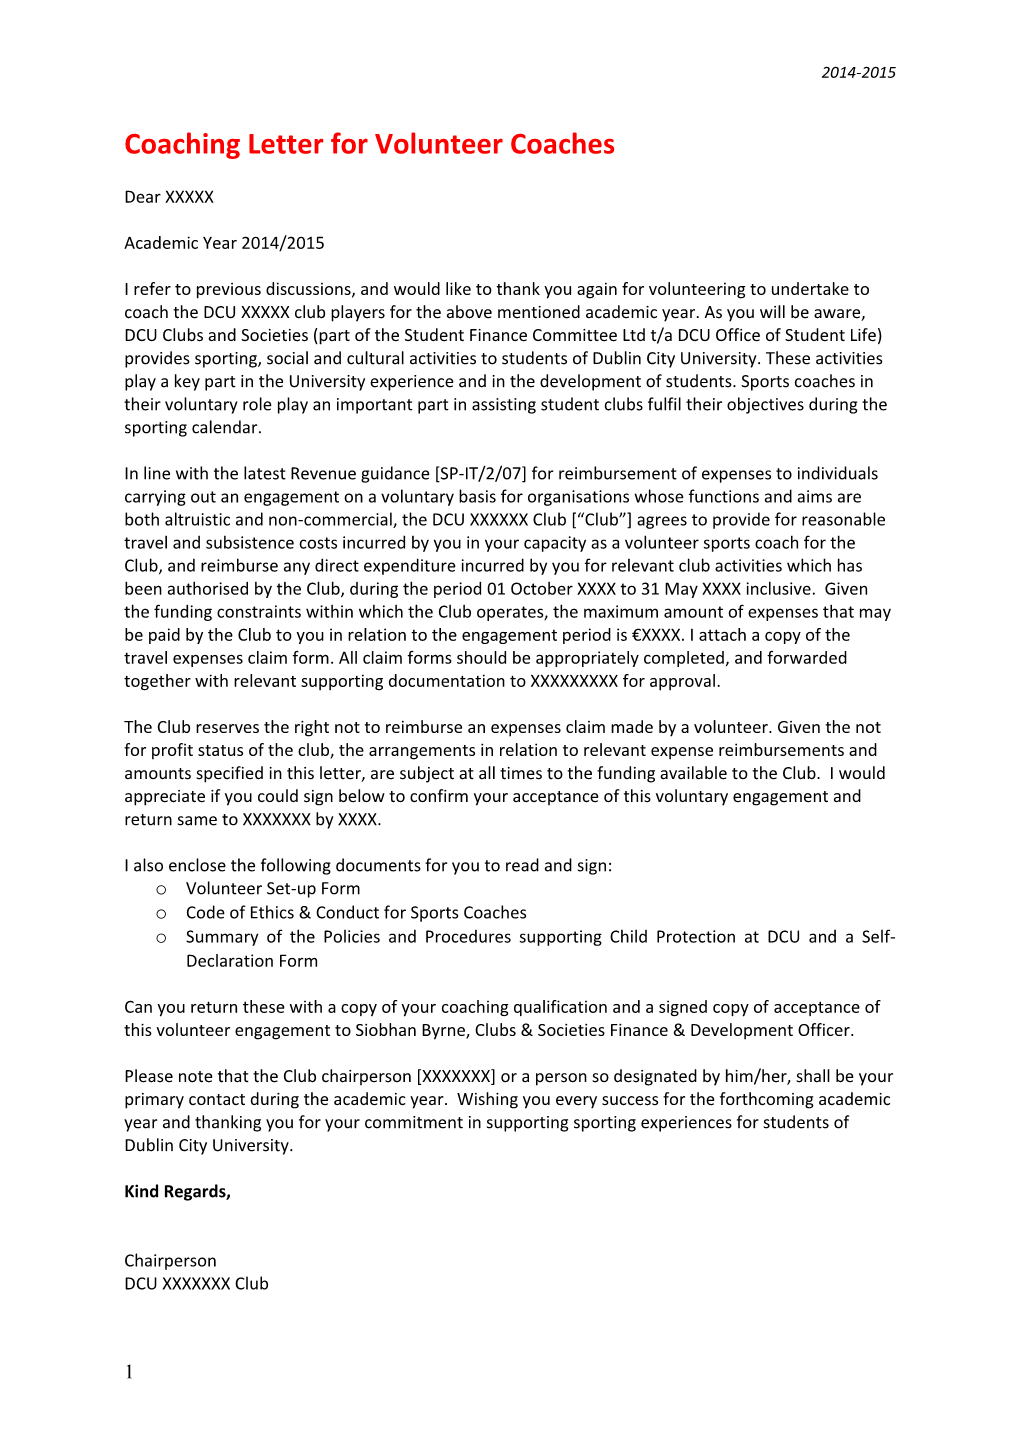 Coaching Letter for Volunteer Coaches